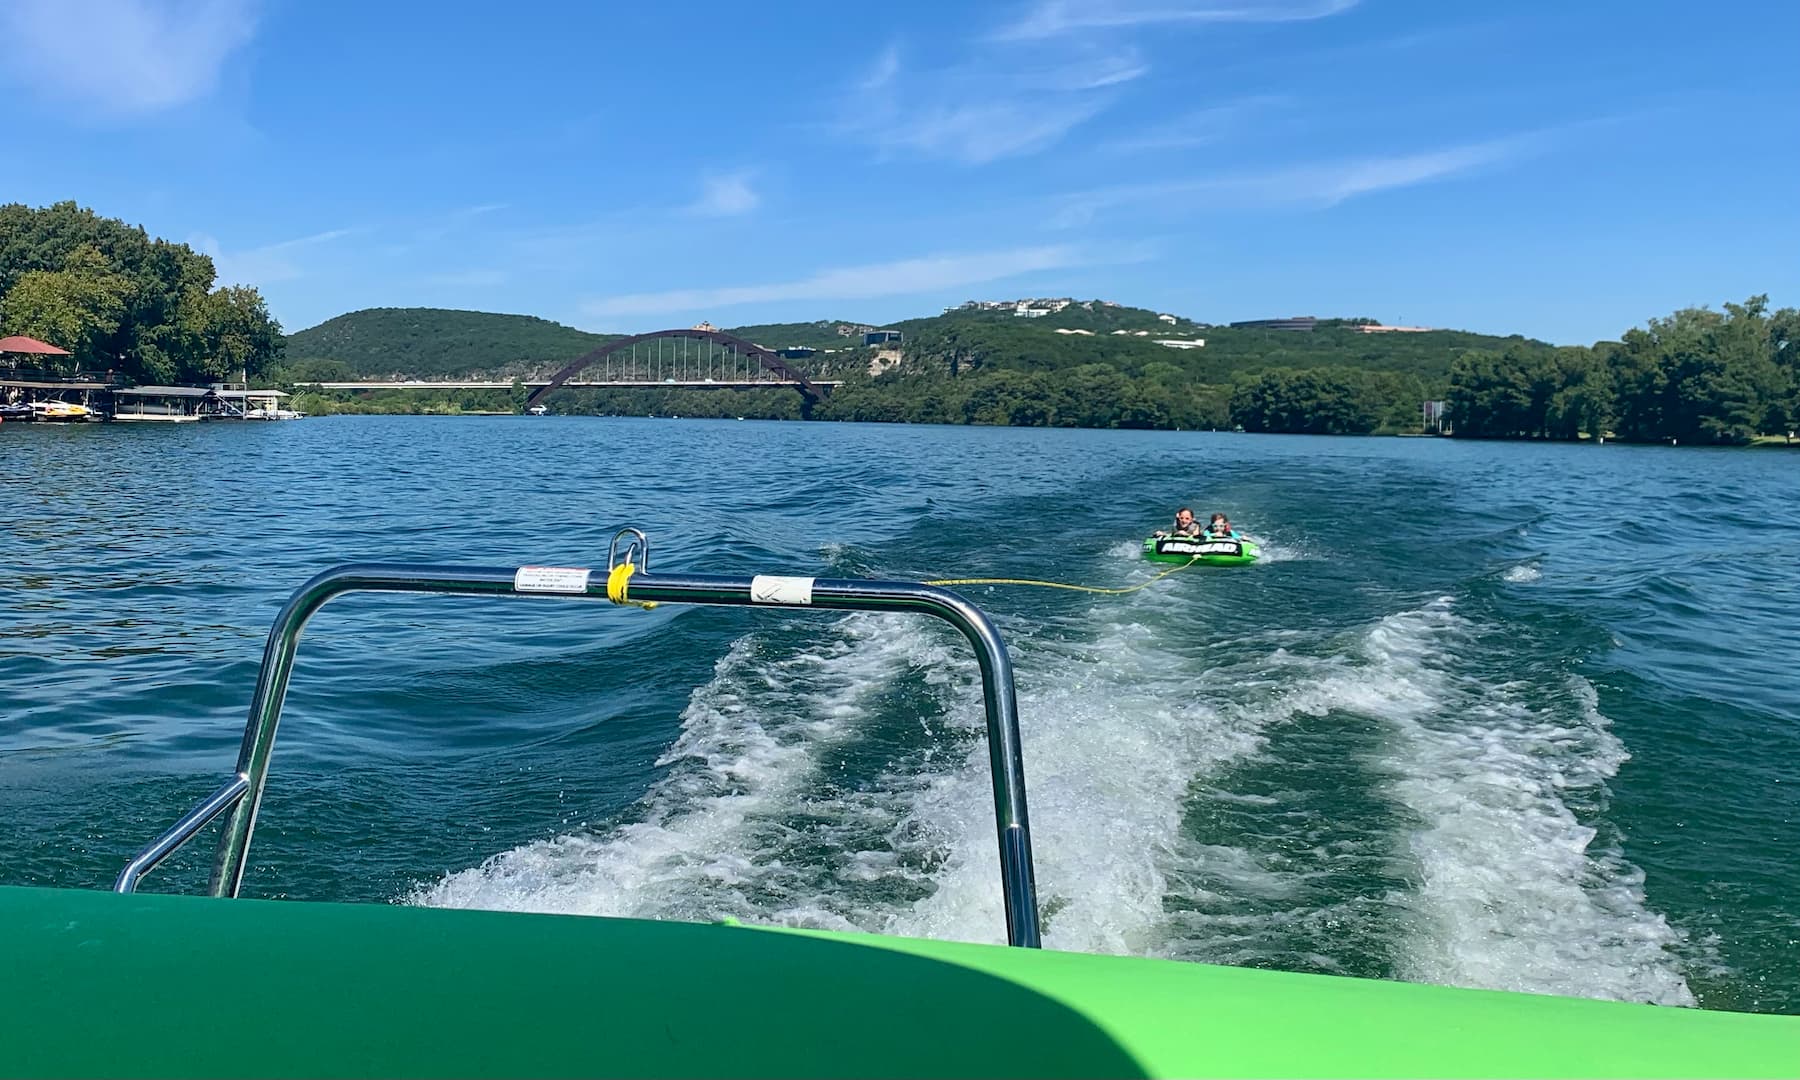 My kids riding in a tube behind a boat on Lake Austin with the famous Pennybacker bridge in the background.